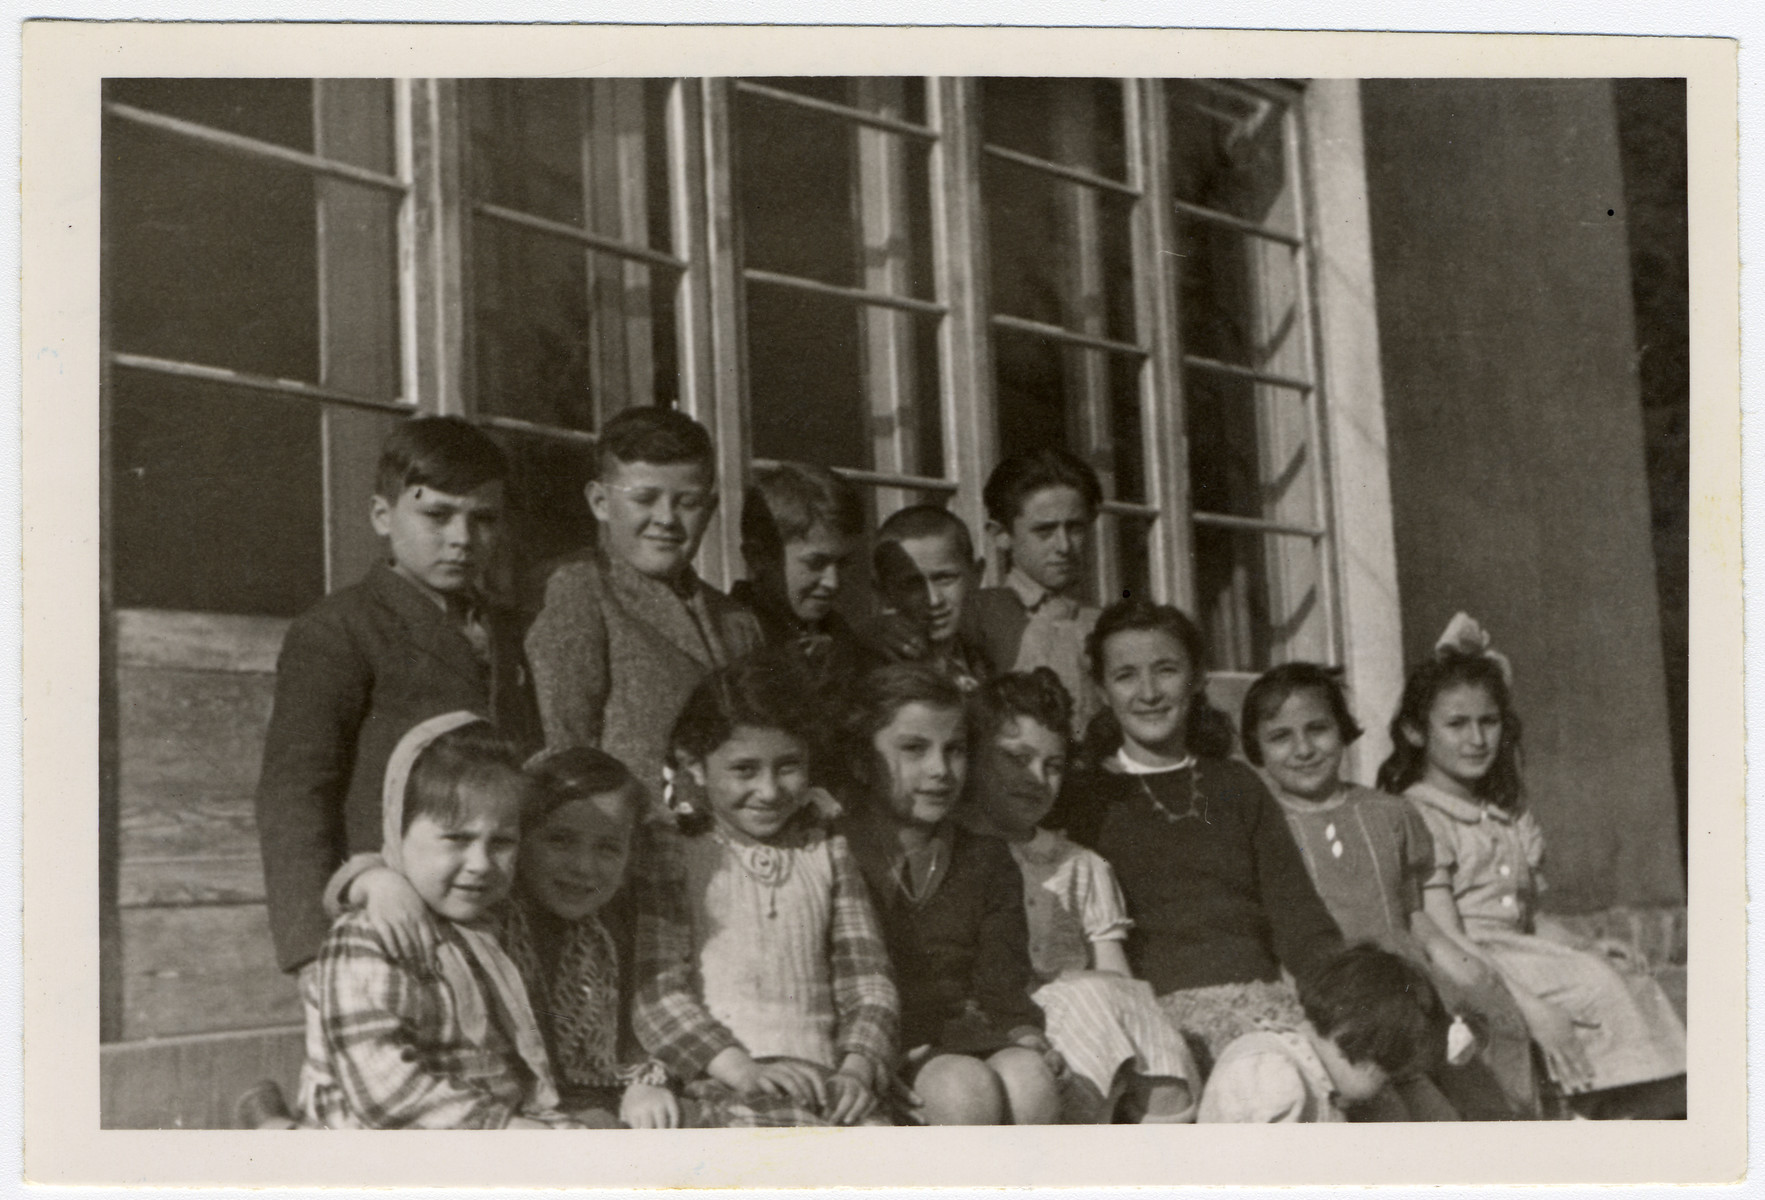 Portrait of young children in the Ziegenhain displaced persons' camp.